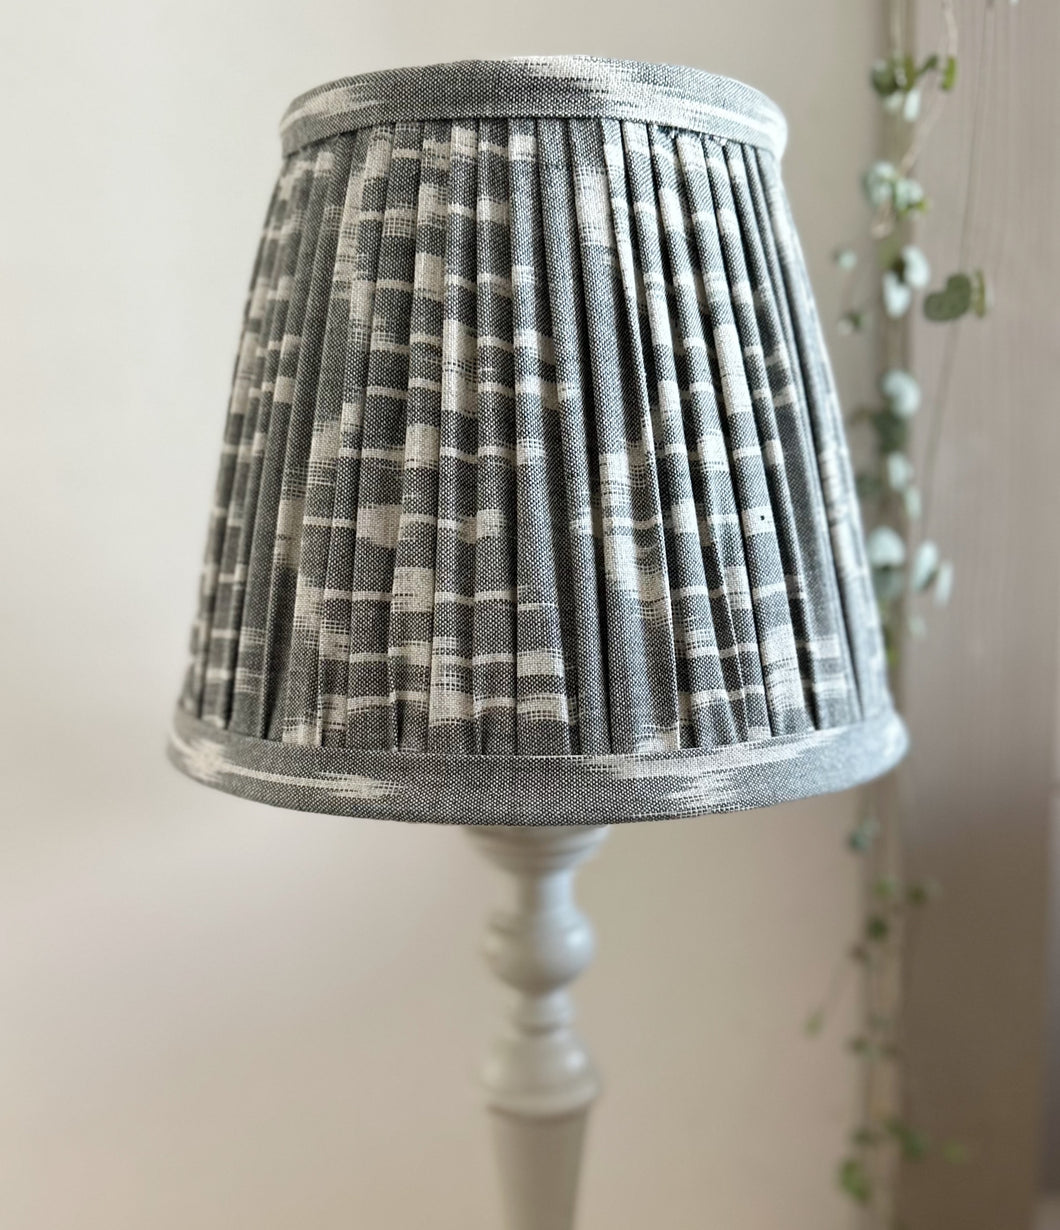 25cm Pleated Grey Lampshade - Grey & White Cotton